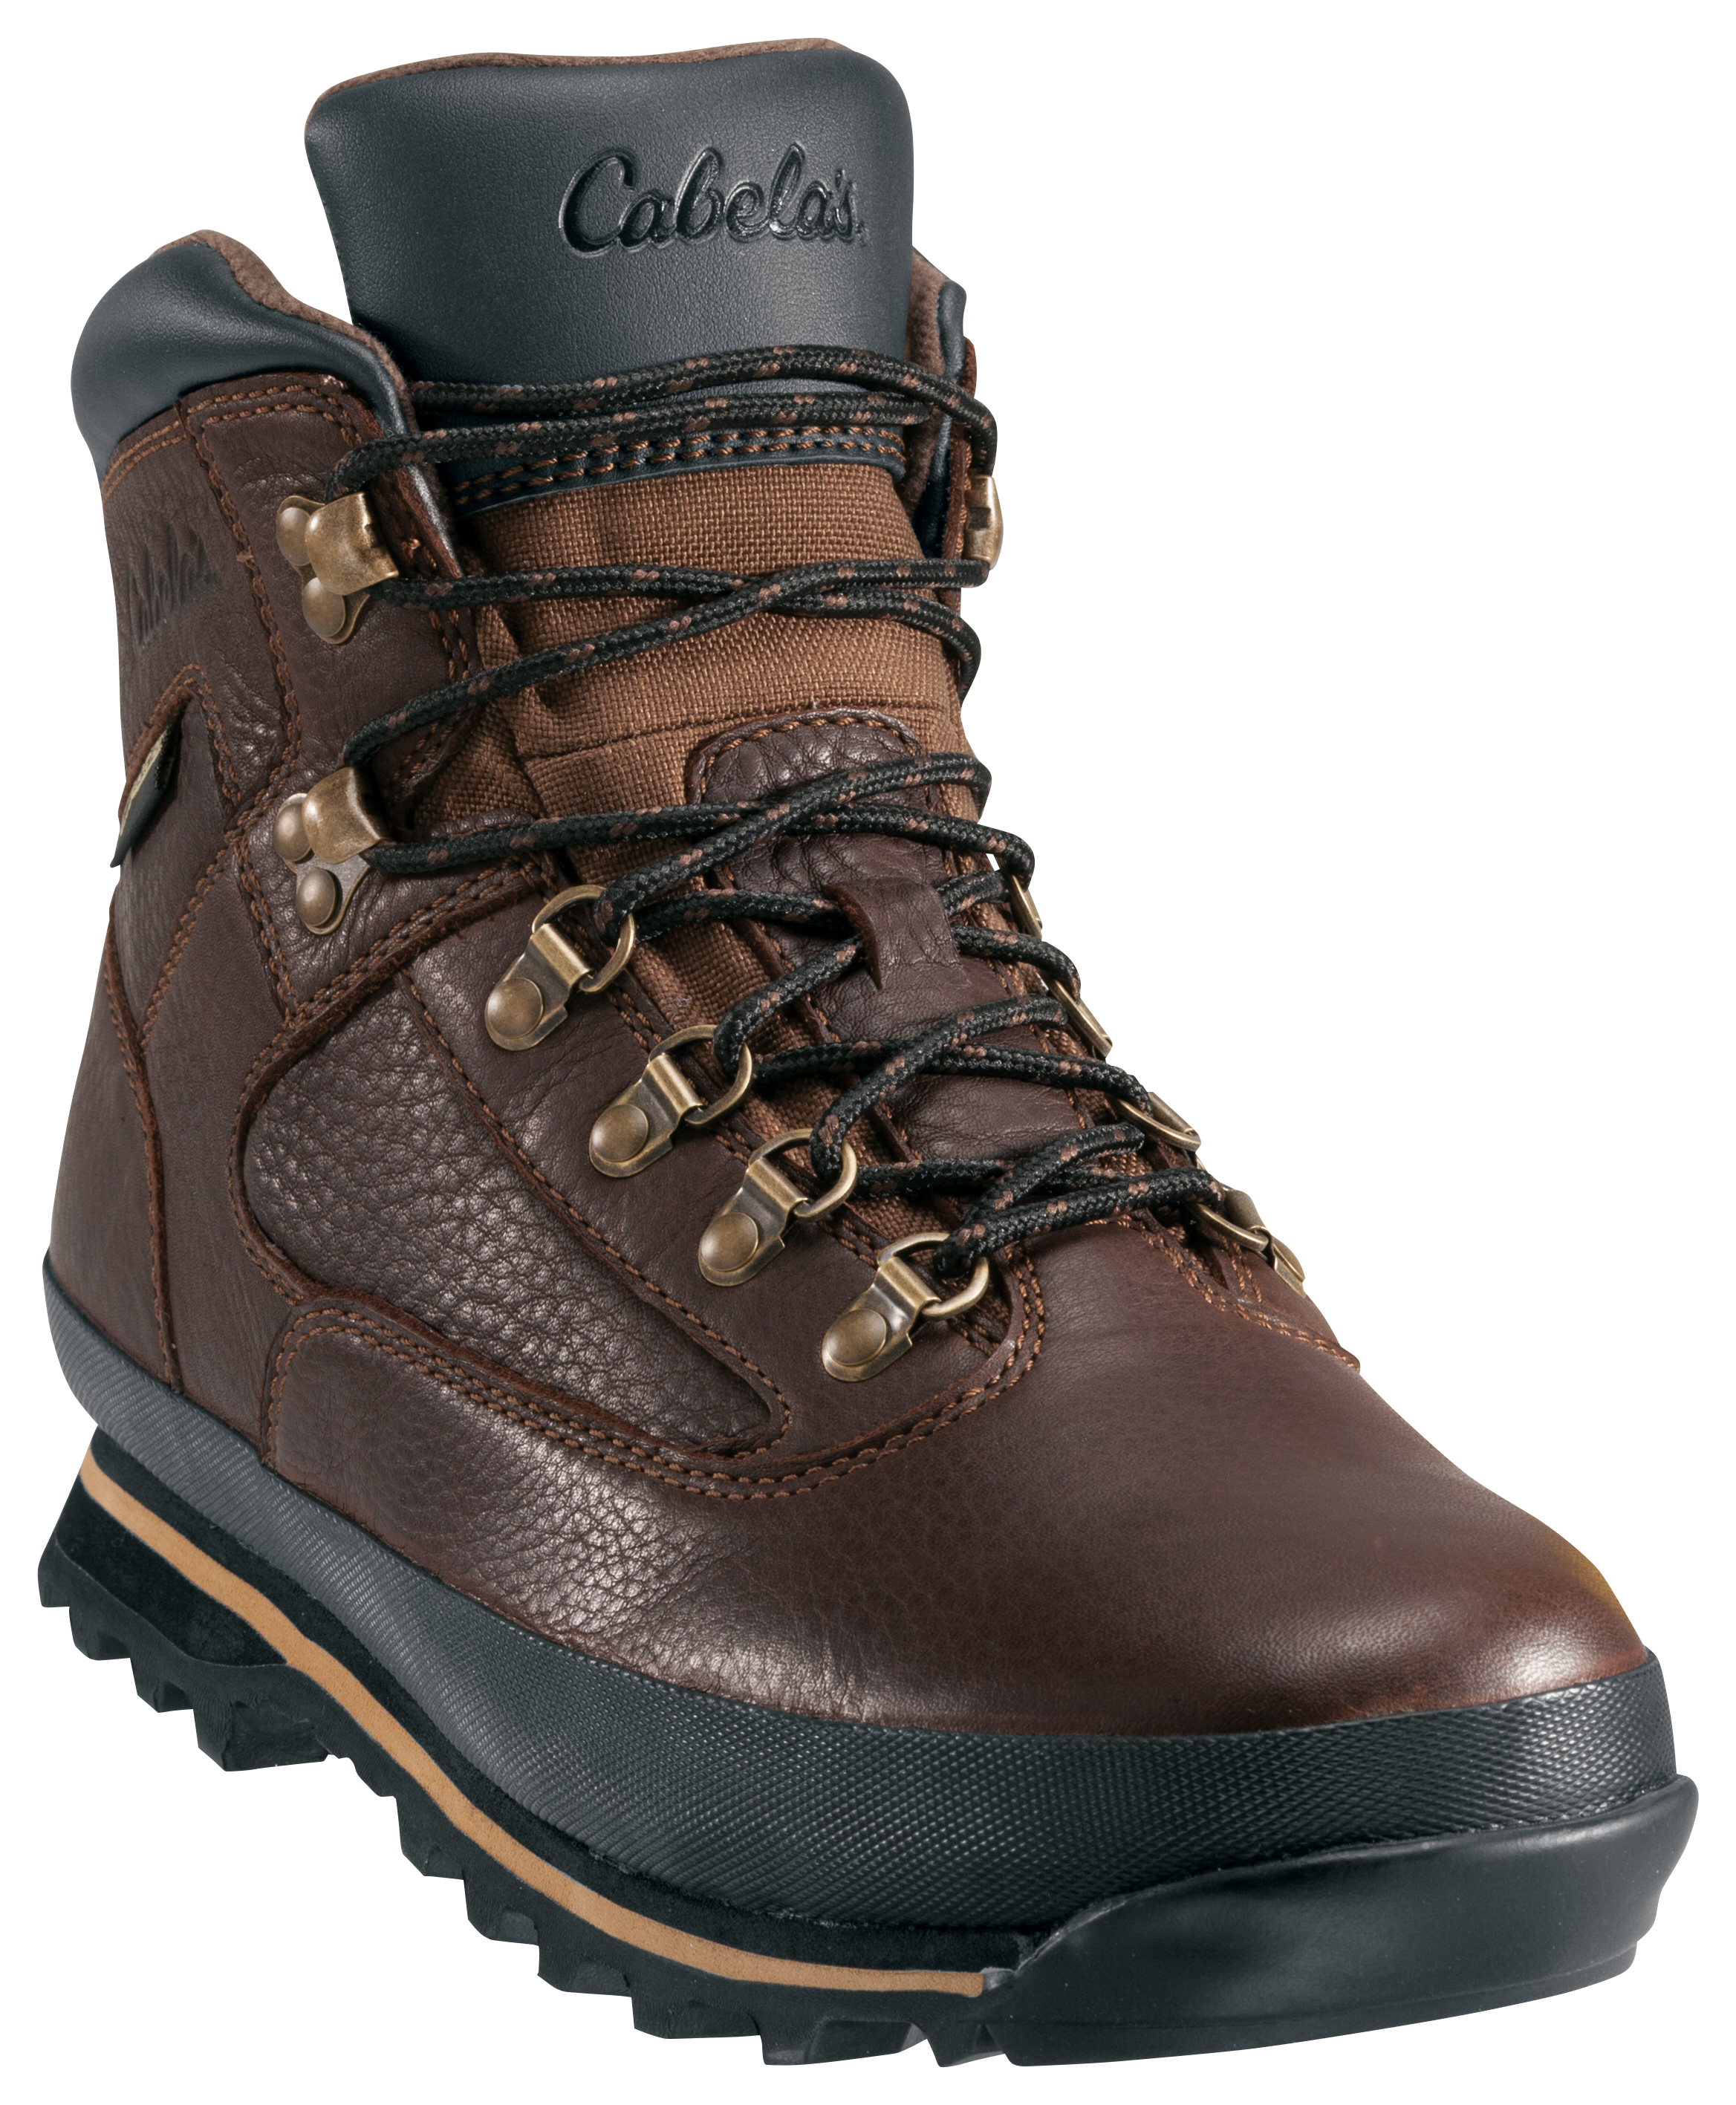 Cabela's Rimrock Mid GORE-TEX Hiking Boots for Men - Brown - 10.5M